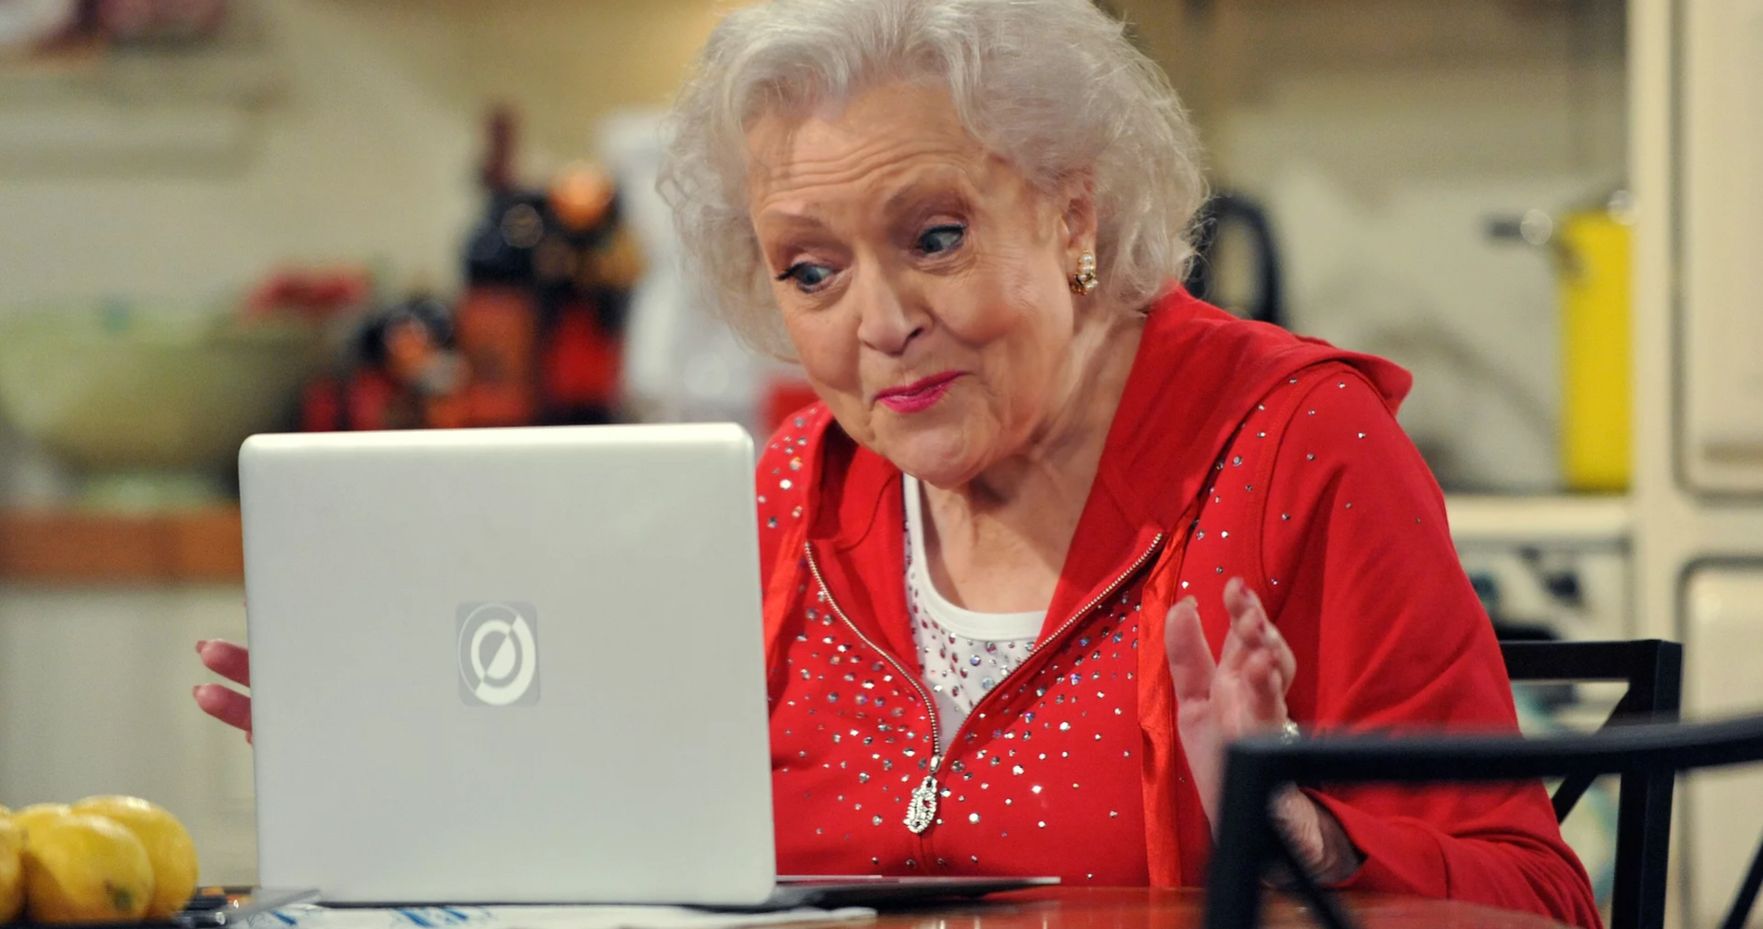 Betty White Celebrates 99th Birthday with Help from Golden Girls Fans